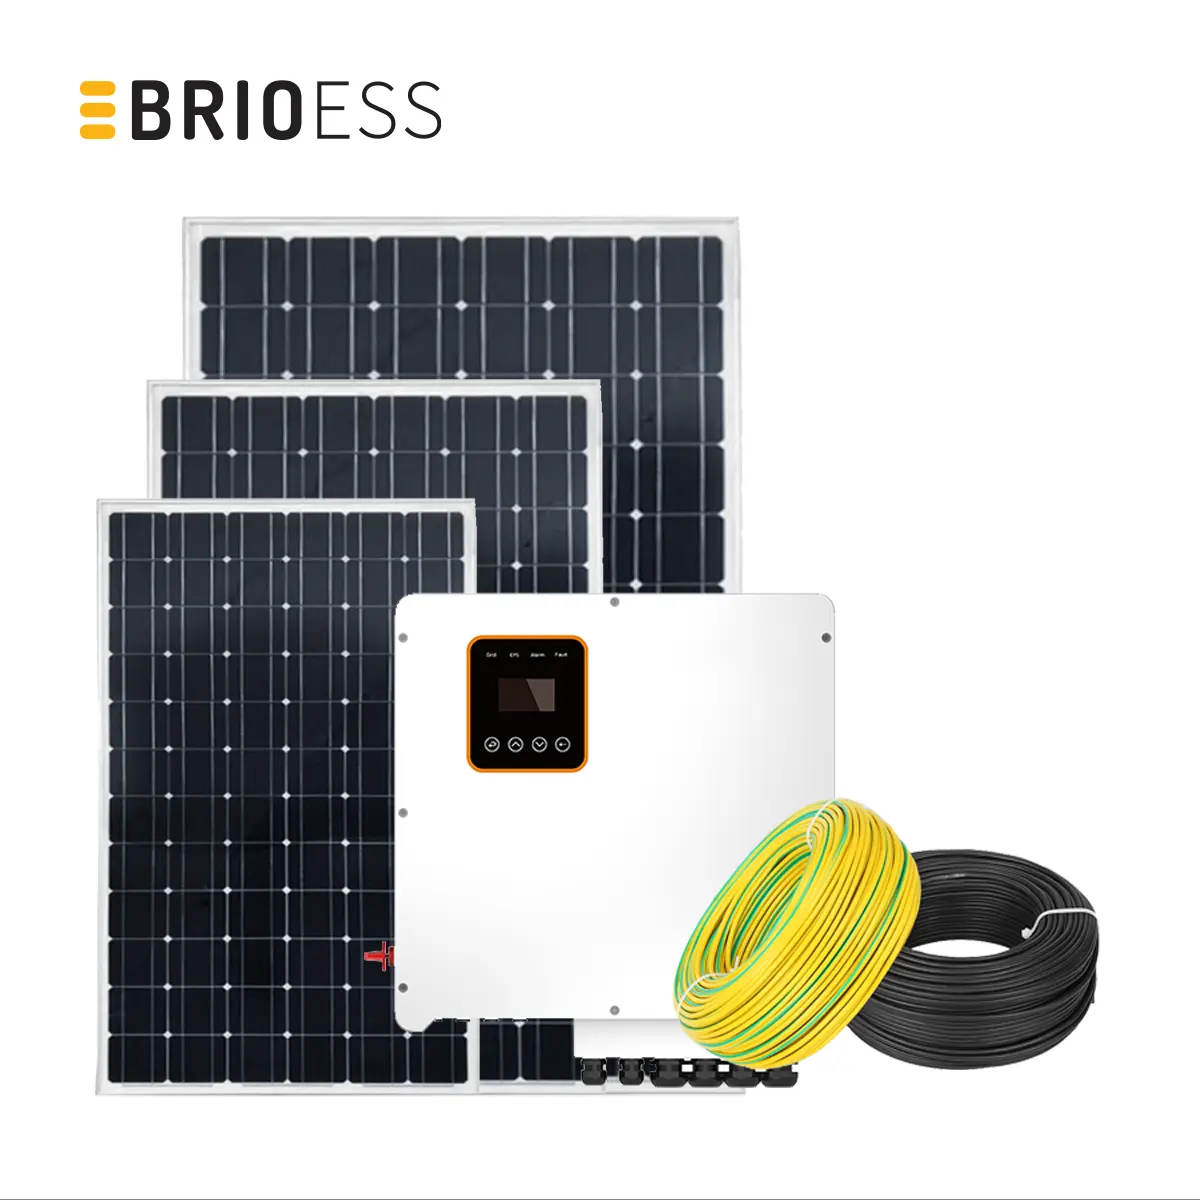 BrioESS Renewable Energy System 5kw On Grid 10kw Home Solar System 10 Kw 5000 Watt Single Phase Solar Power System For Home Roof